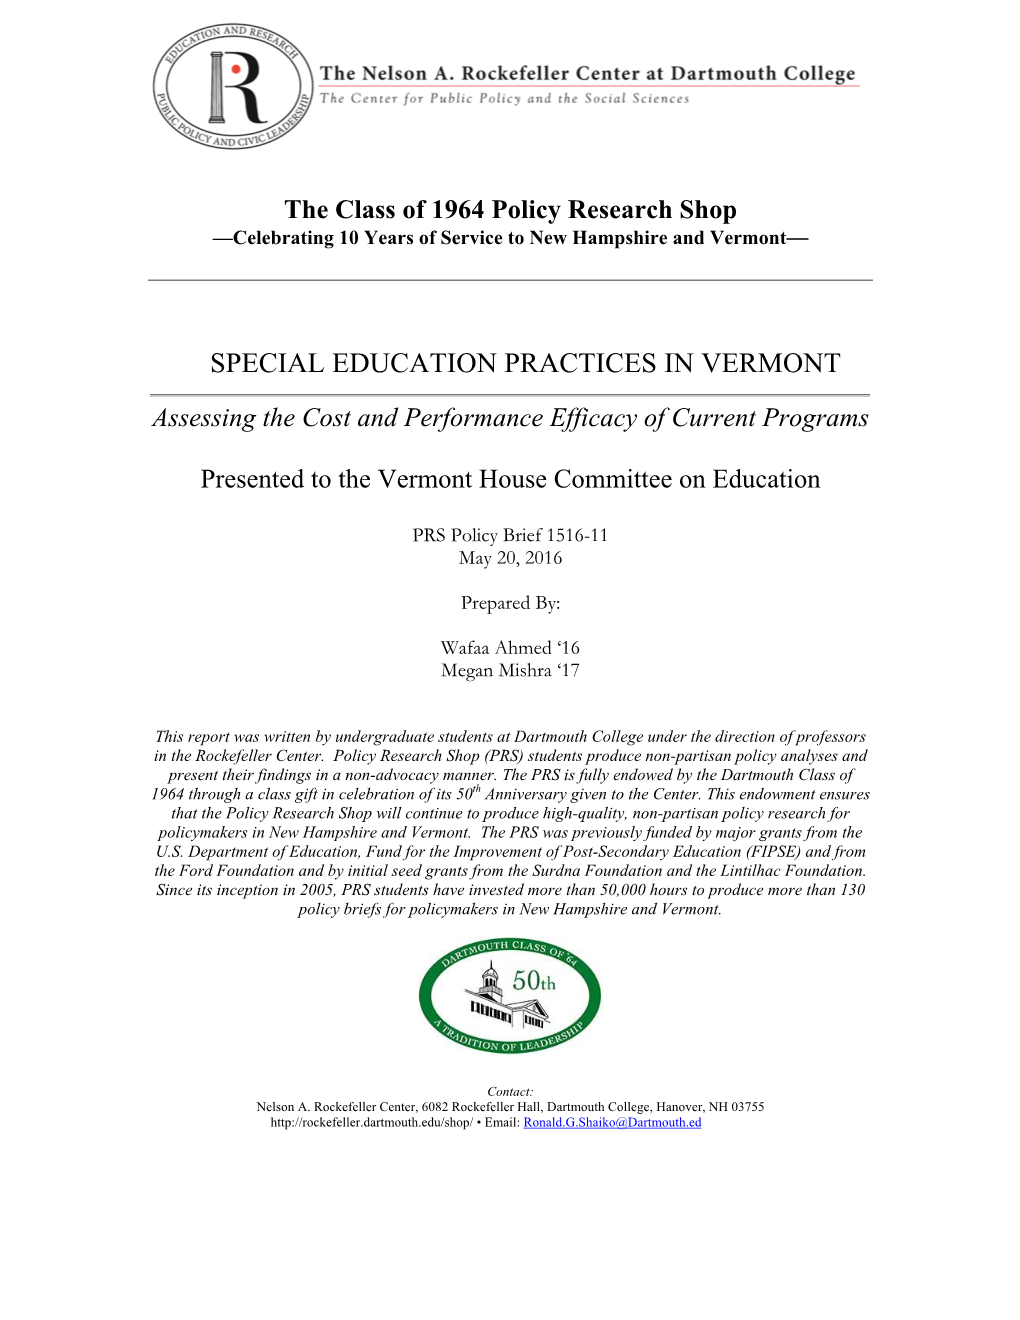 Special Education Practices in Vermont